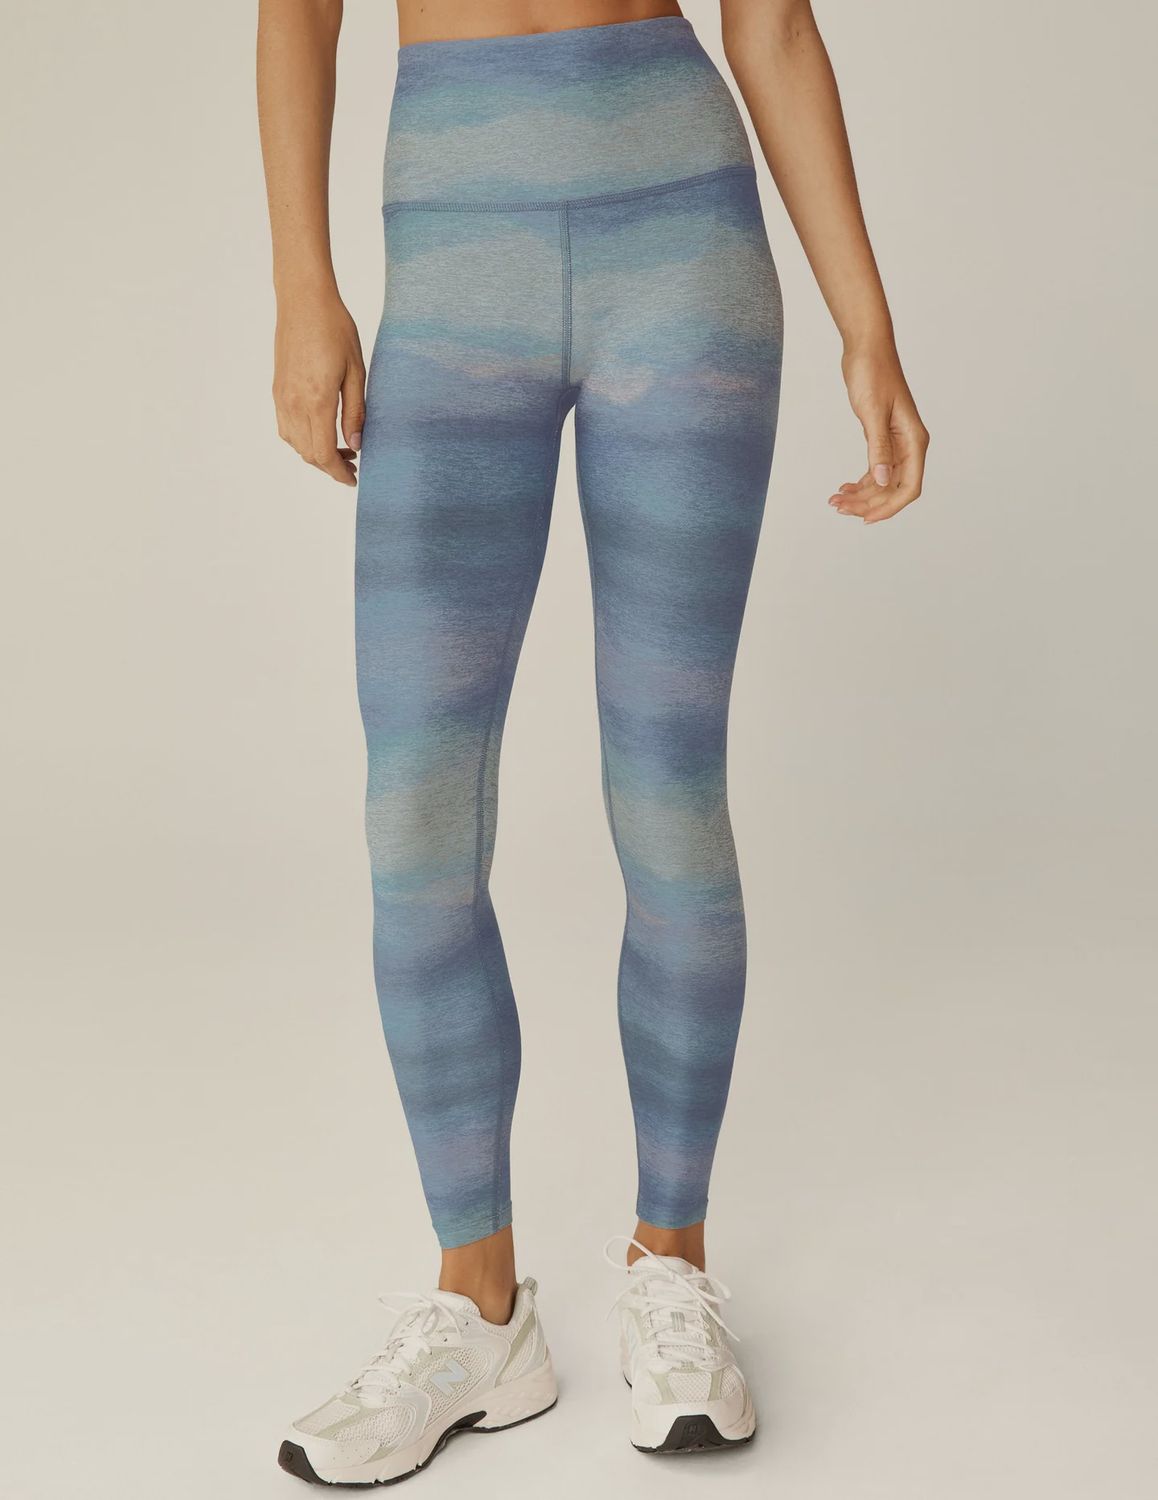 SoftMark Caught In The Midi High Waisted Legging, Color: Watercolor Waves, Size: S